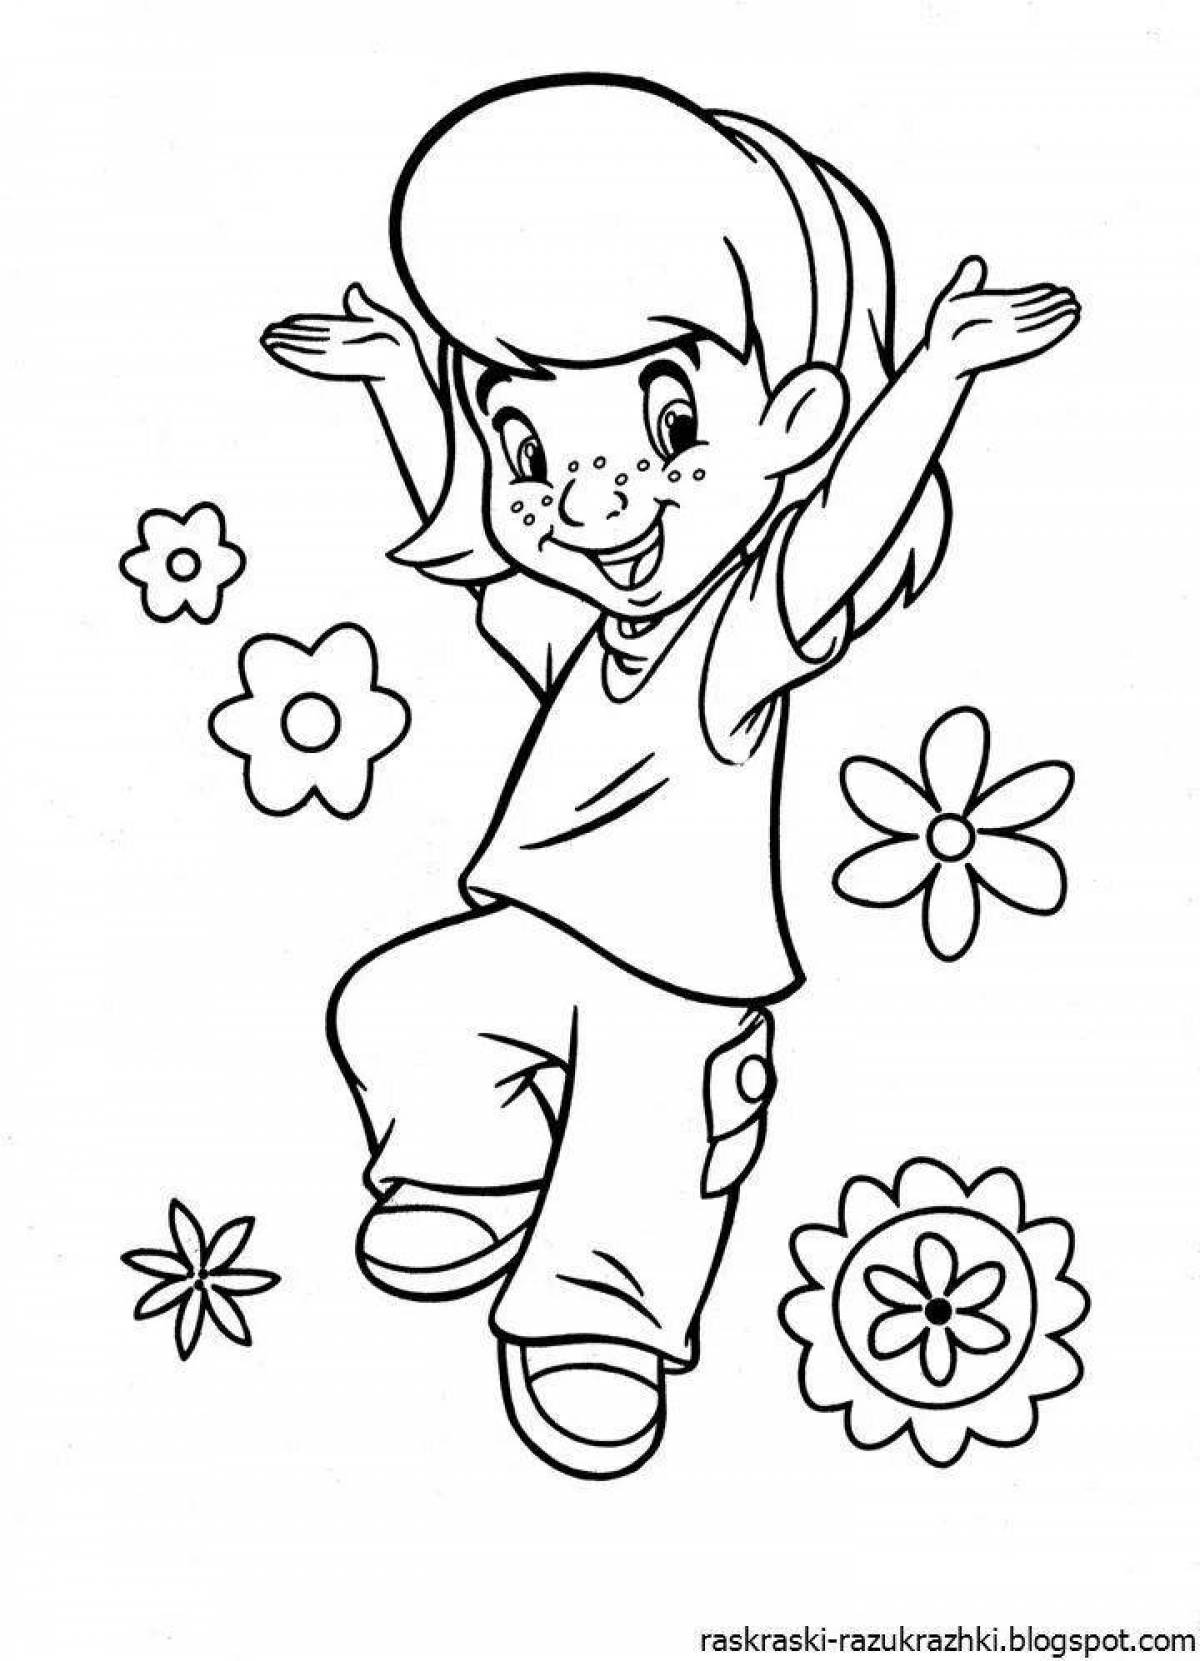 Glowing baby coloring page